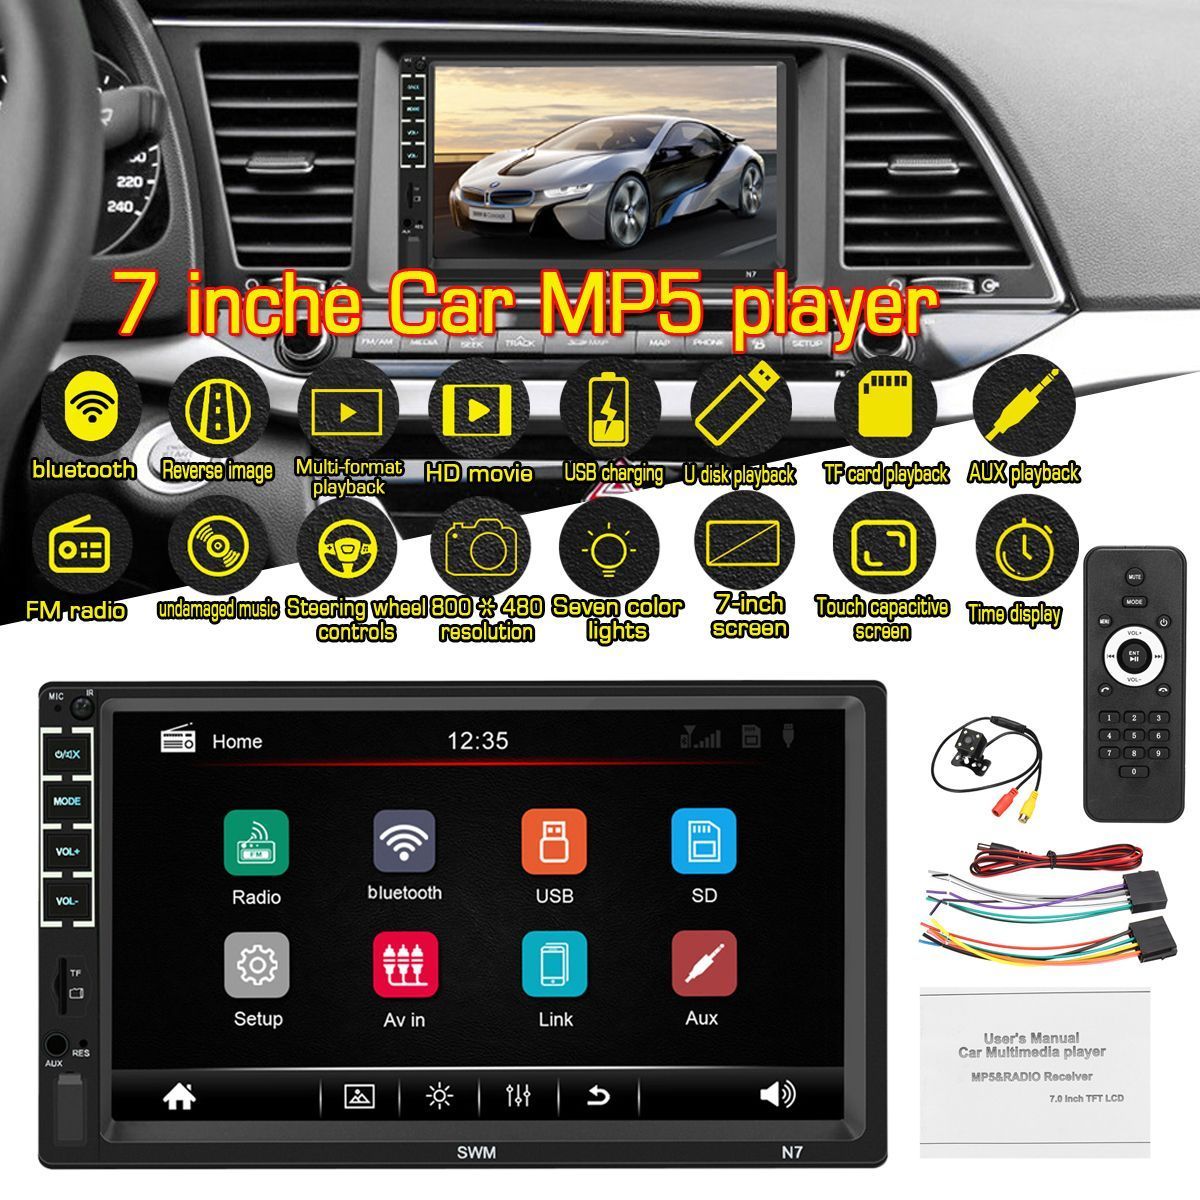 SWM-N7-Car-MP5-Multimedia-Player-Radio-LCD-Capacitive-Touch-Screen-FM-AUX-USB-TF-Card-Remote-Control-1657312